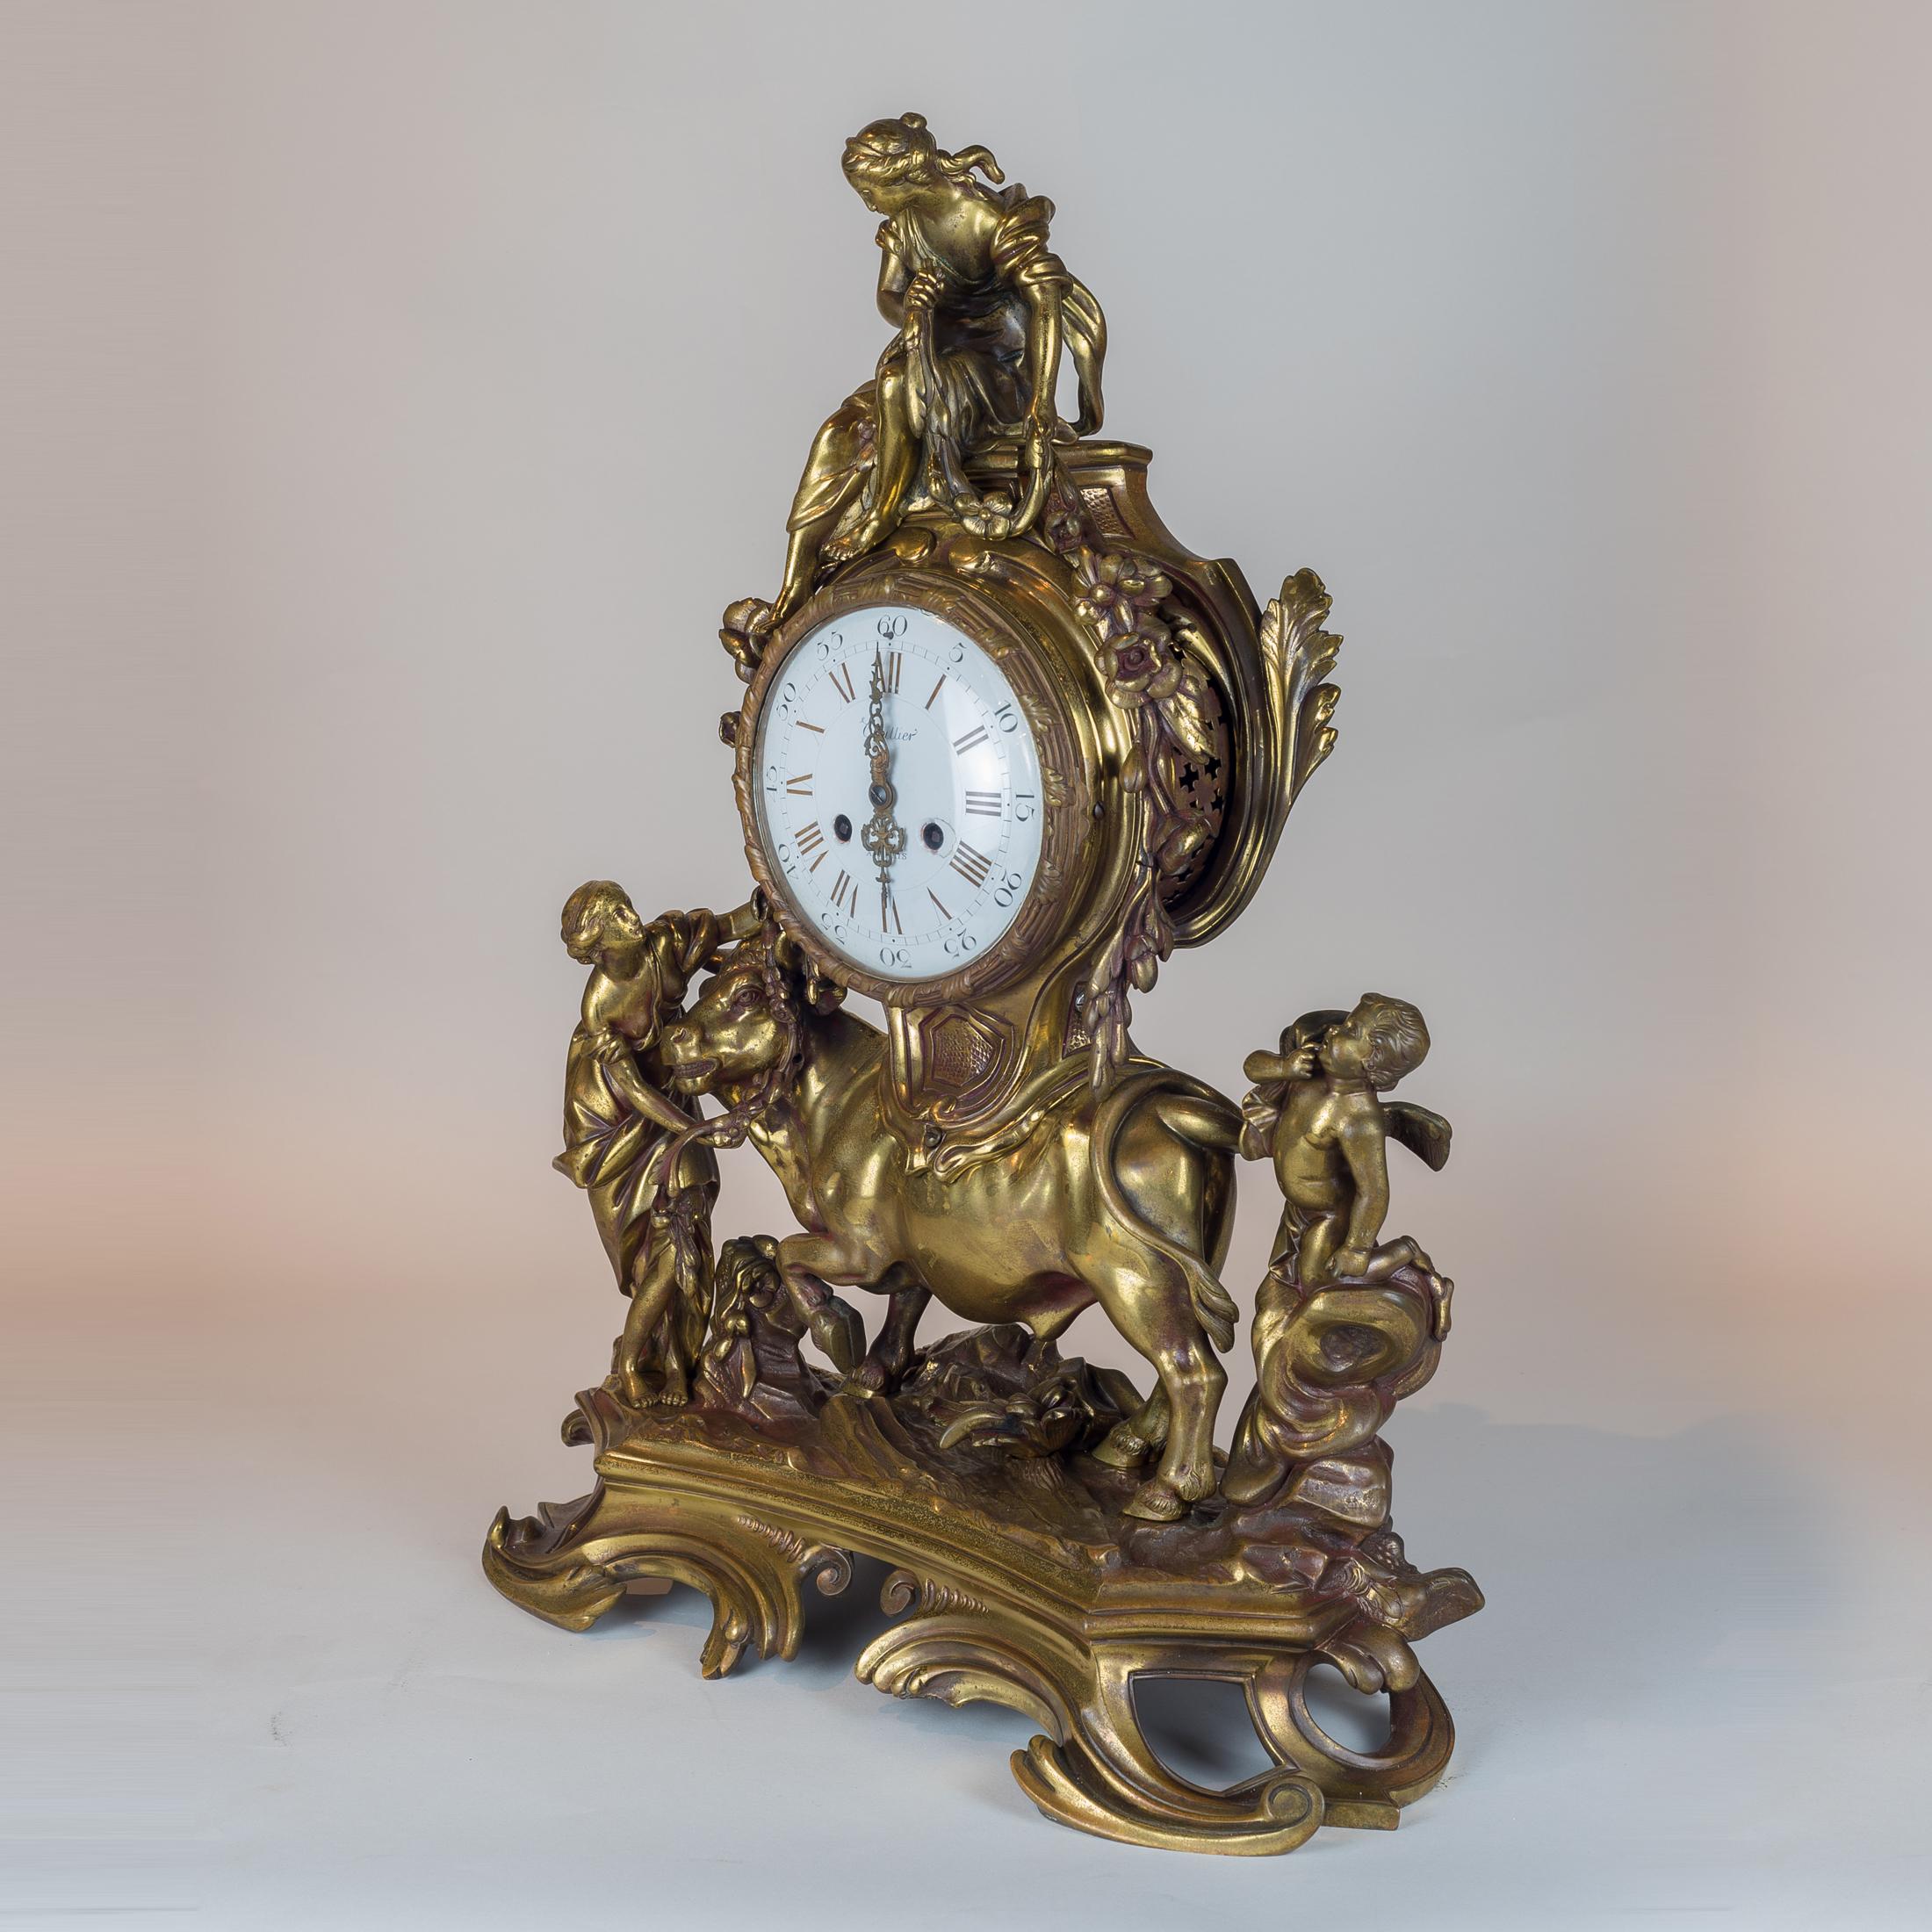 A fine french gilt bronze figural mantel clock. Surmounted on a plinth base with scrolling acanthus detail.

Origin: French
Date: 19th century
Dimension: 22 in x 17 1/2 in.